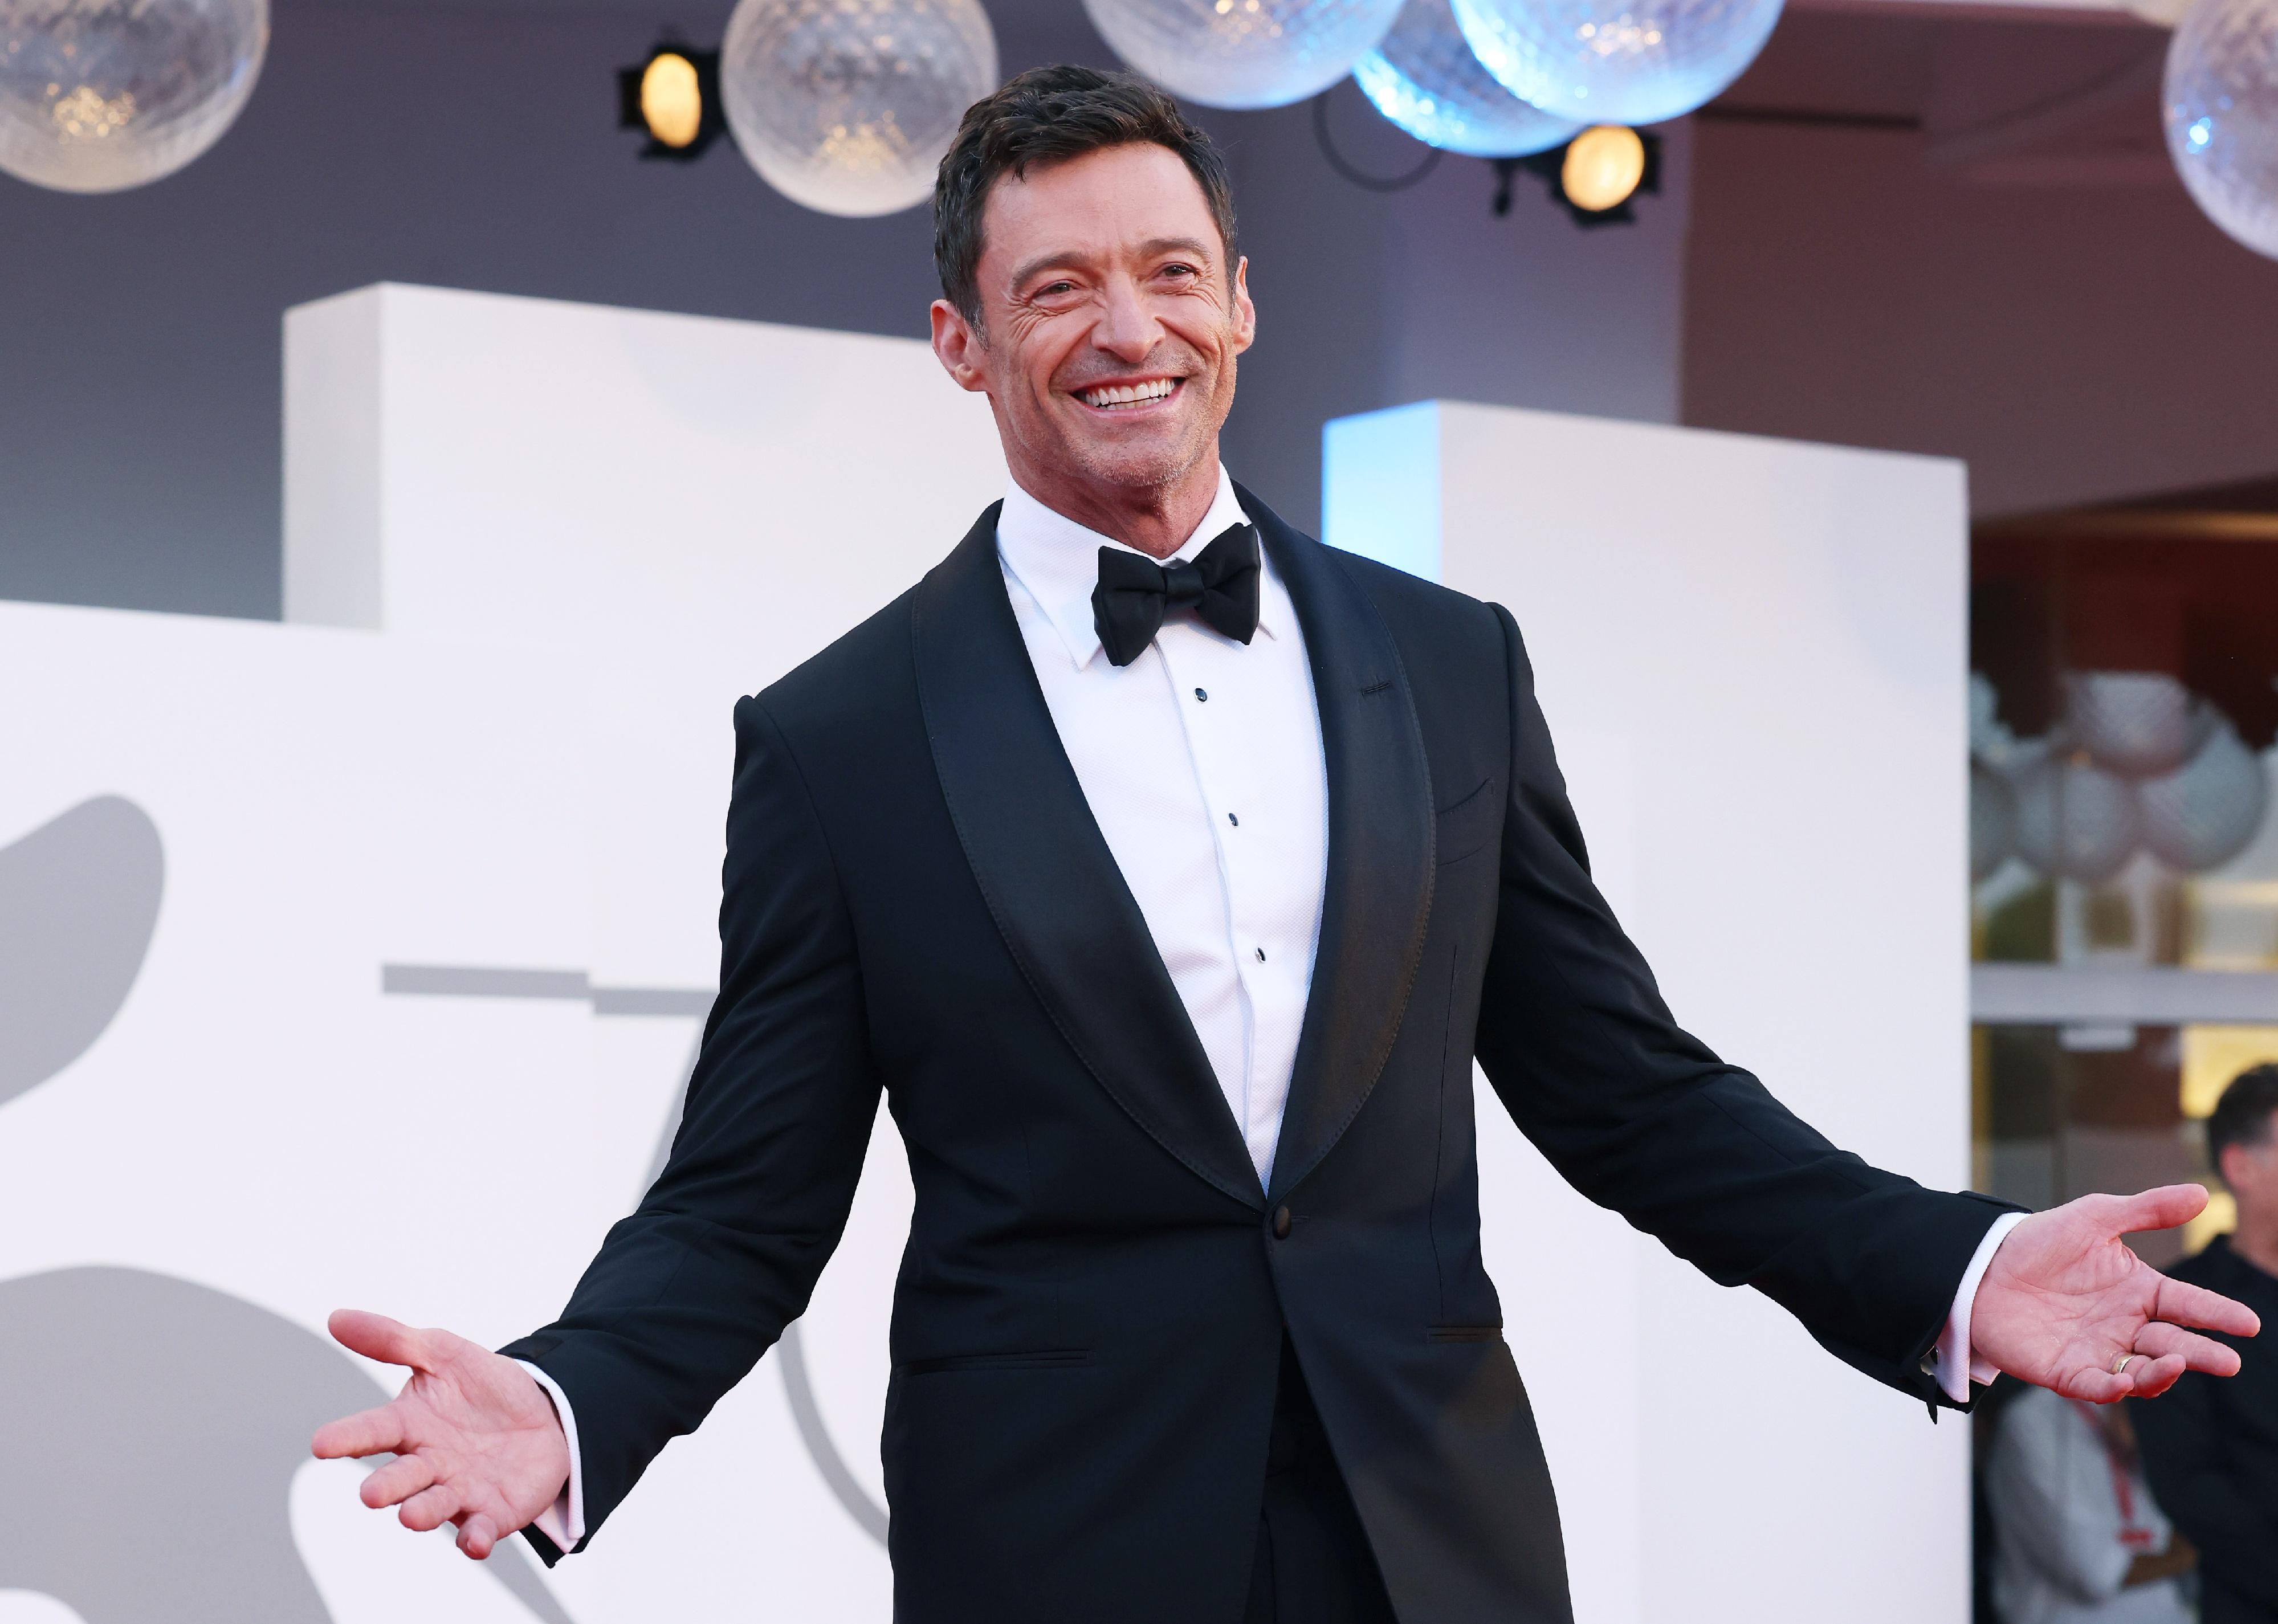 Hugh Jackman attends "The Son" red carpet at the 79th Venice International Film Festival.